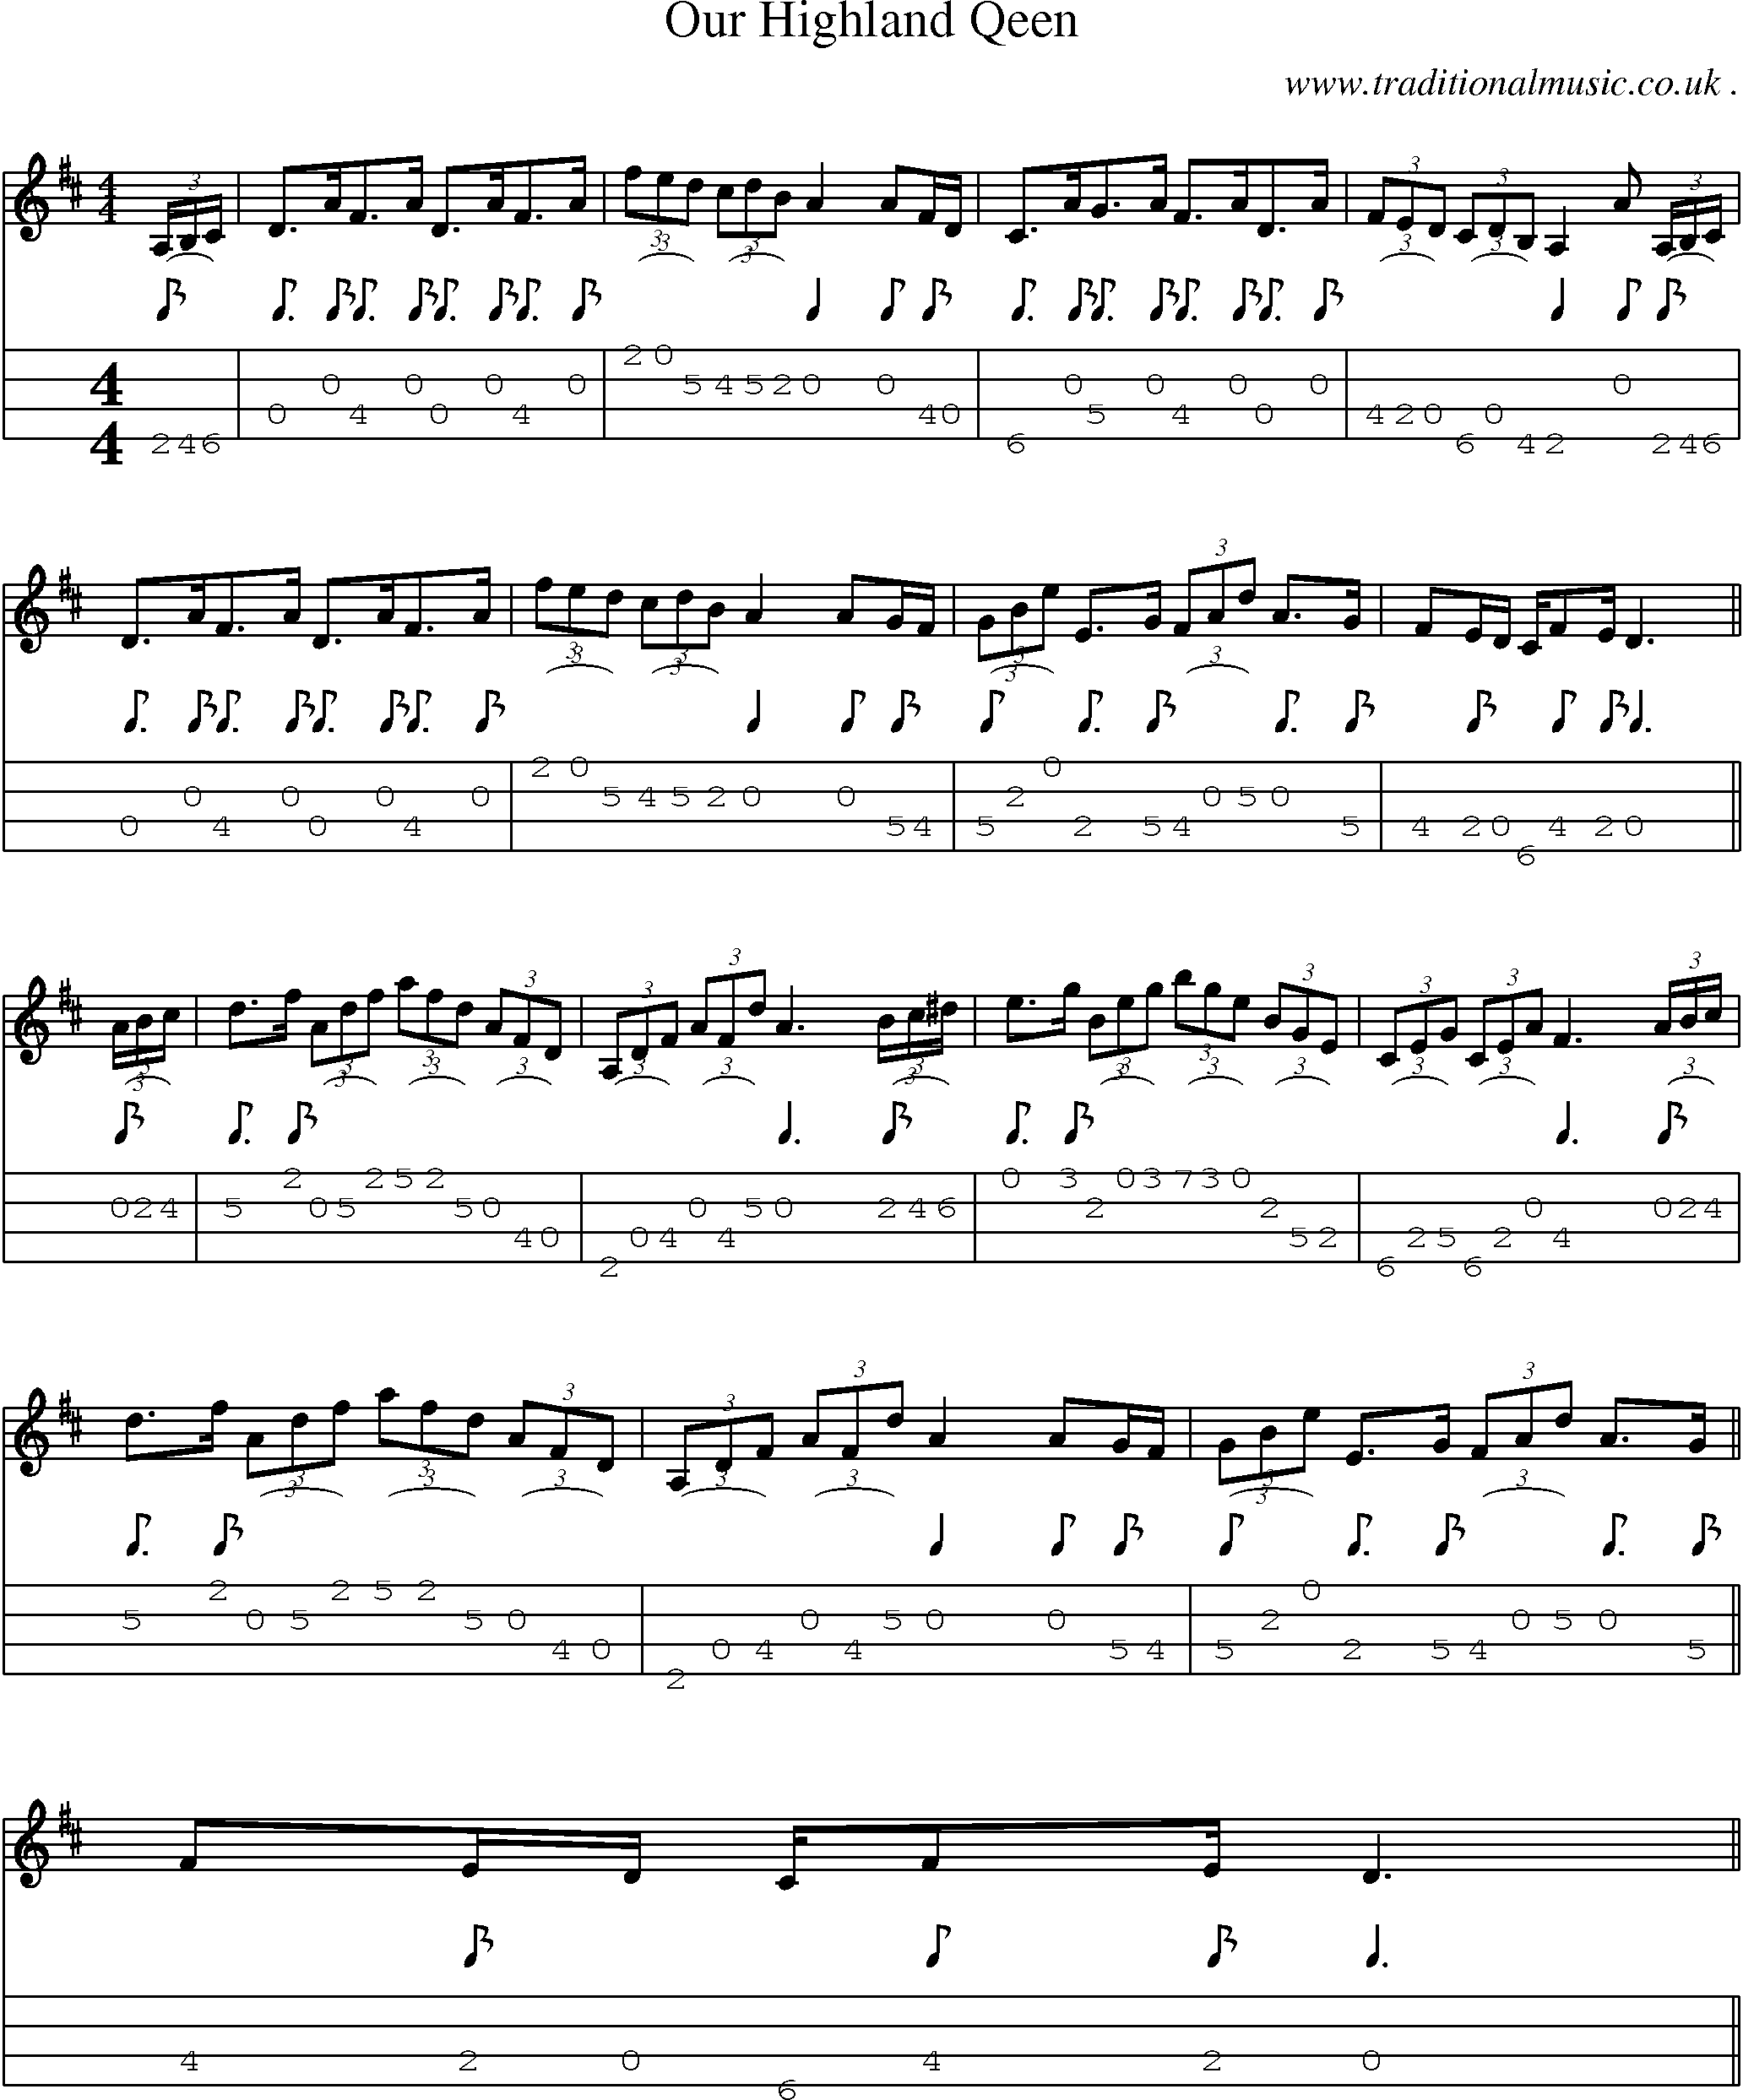 Sheet-Music and Mandolin Tabs for Our Highland Qeen